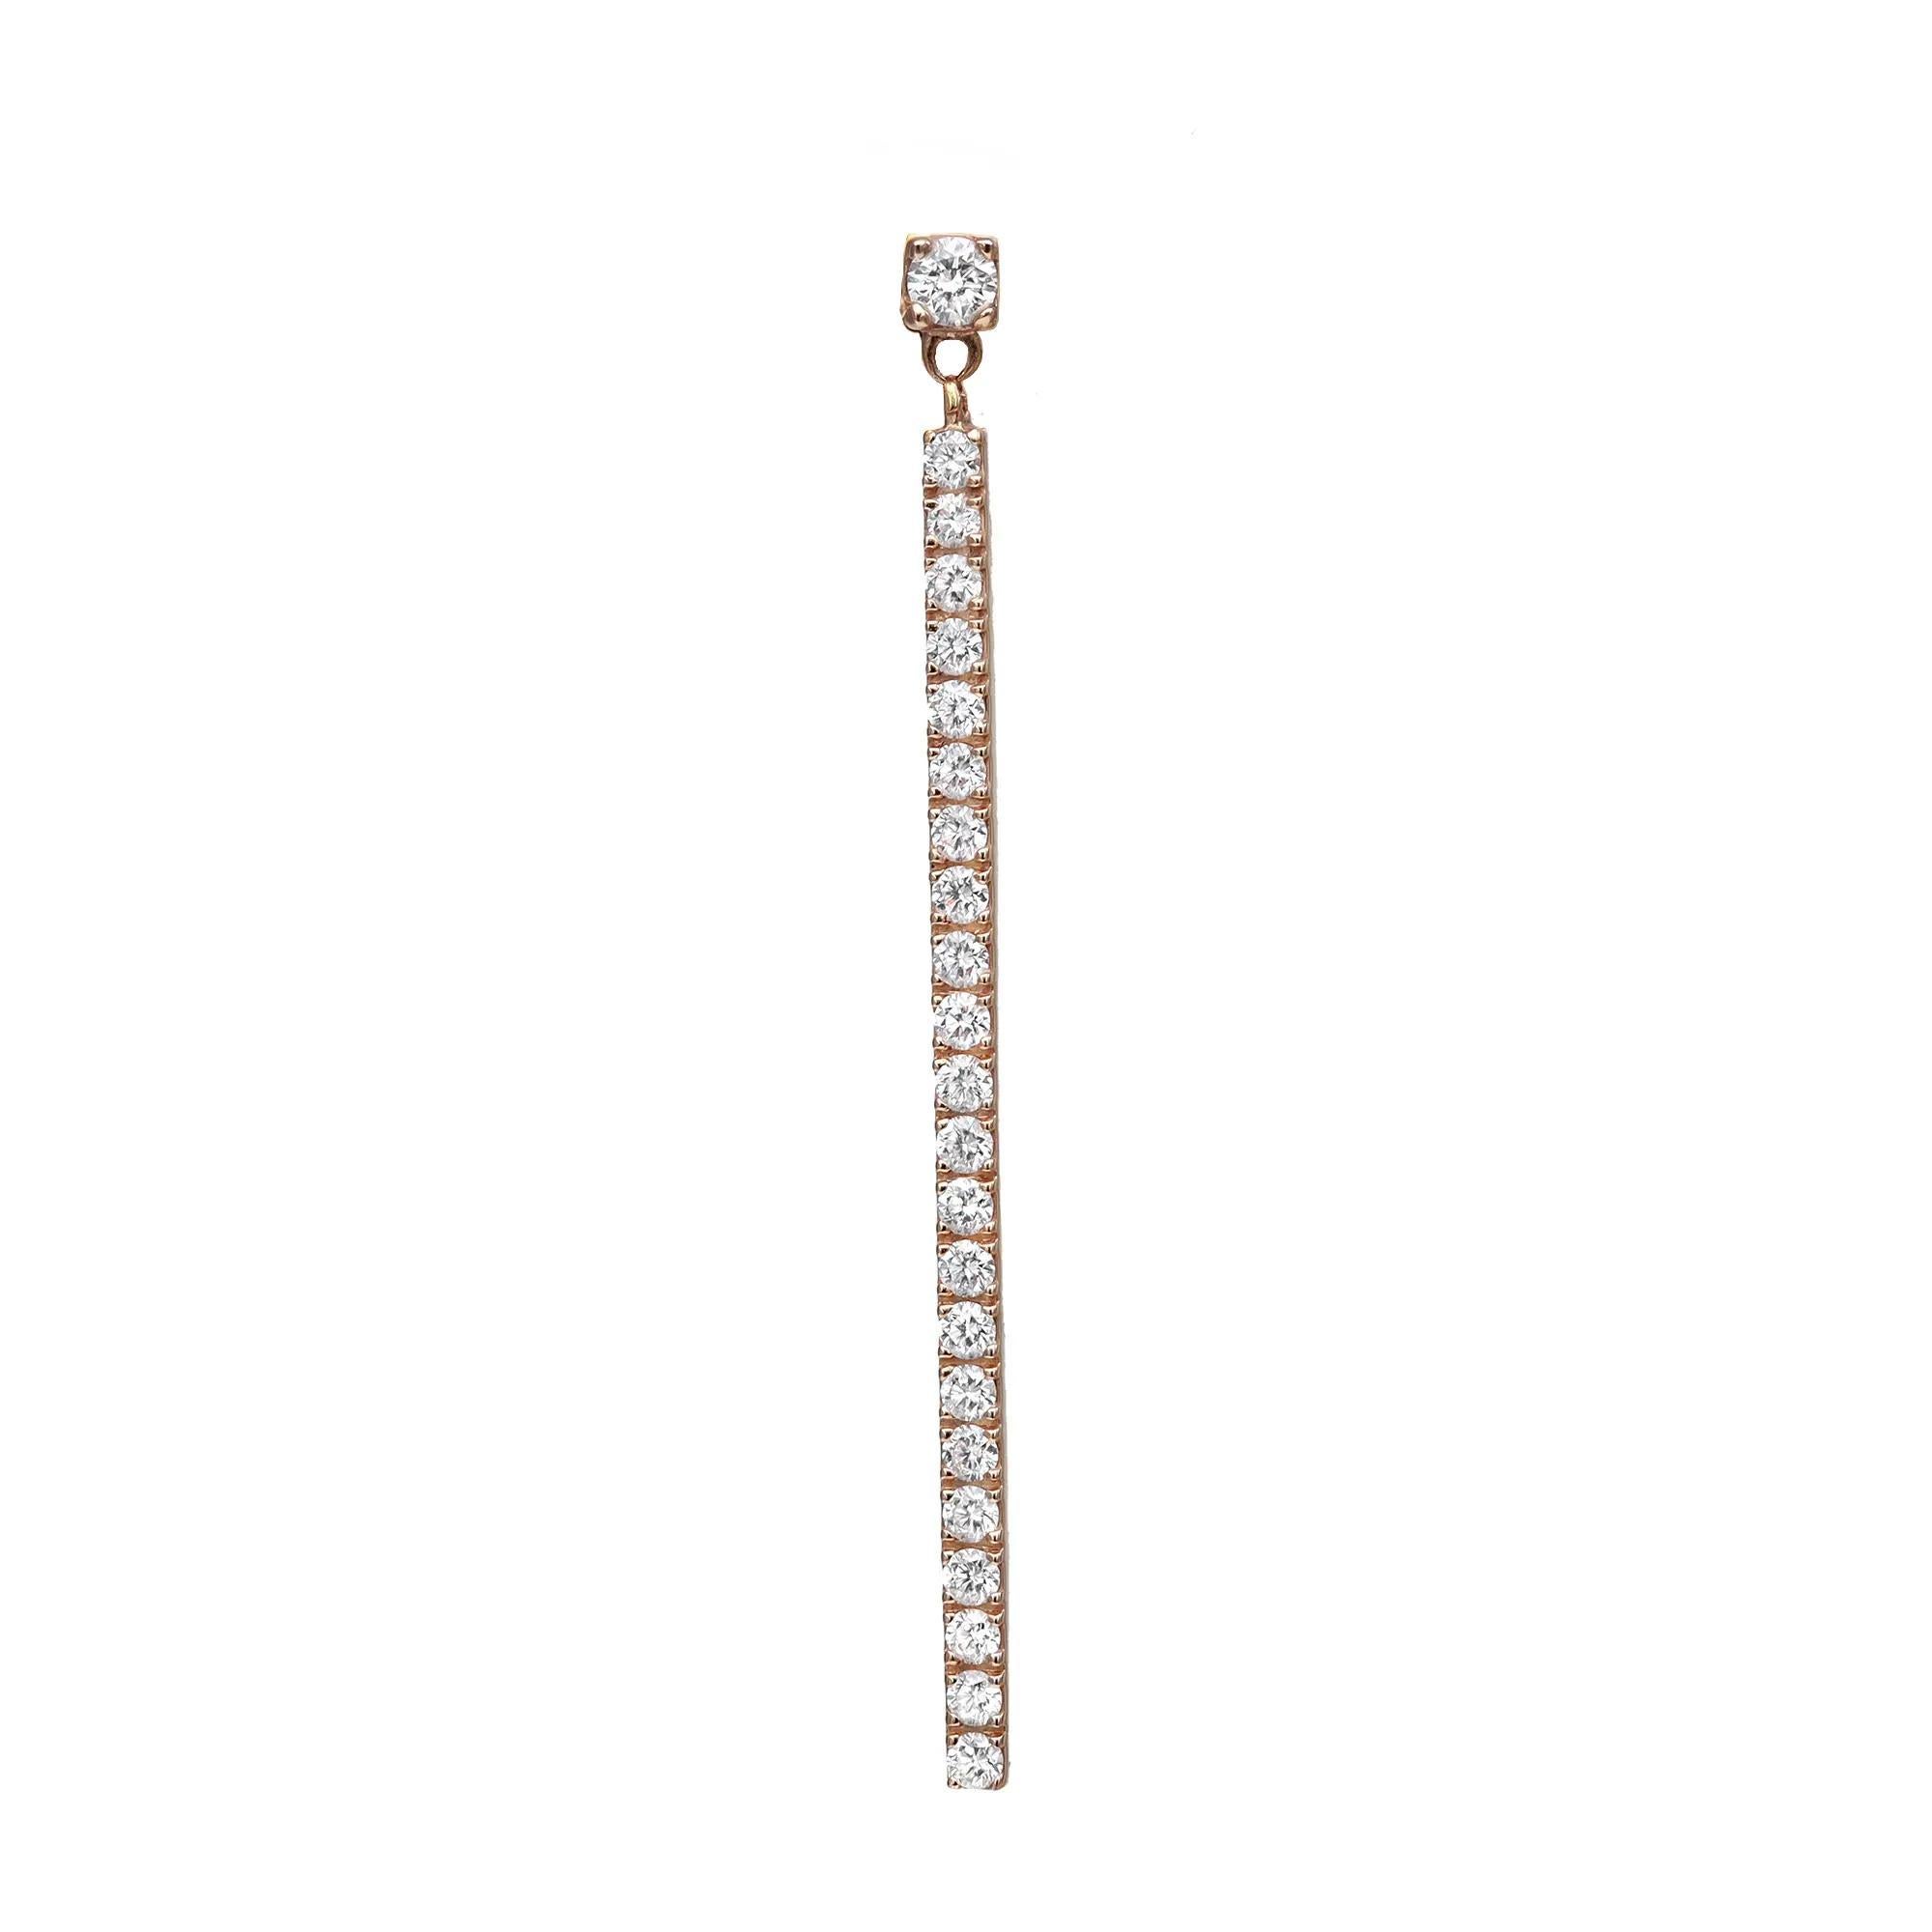 Shimmering round diamonds sway along these Messika Barrette Gatsby diamond long drop earrings. Crafted in 18K rose gold. Features a single row of pave set round brilliant cut diamonds with a prong set round diamond on the top. Secured with push